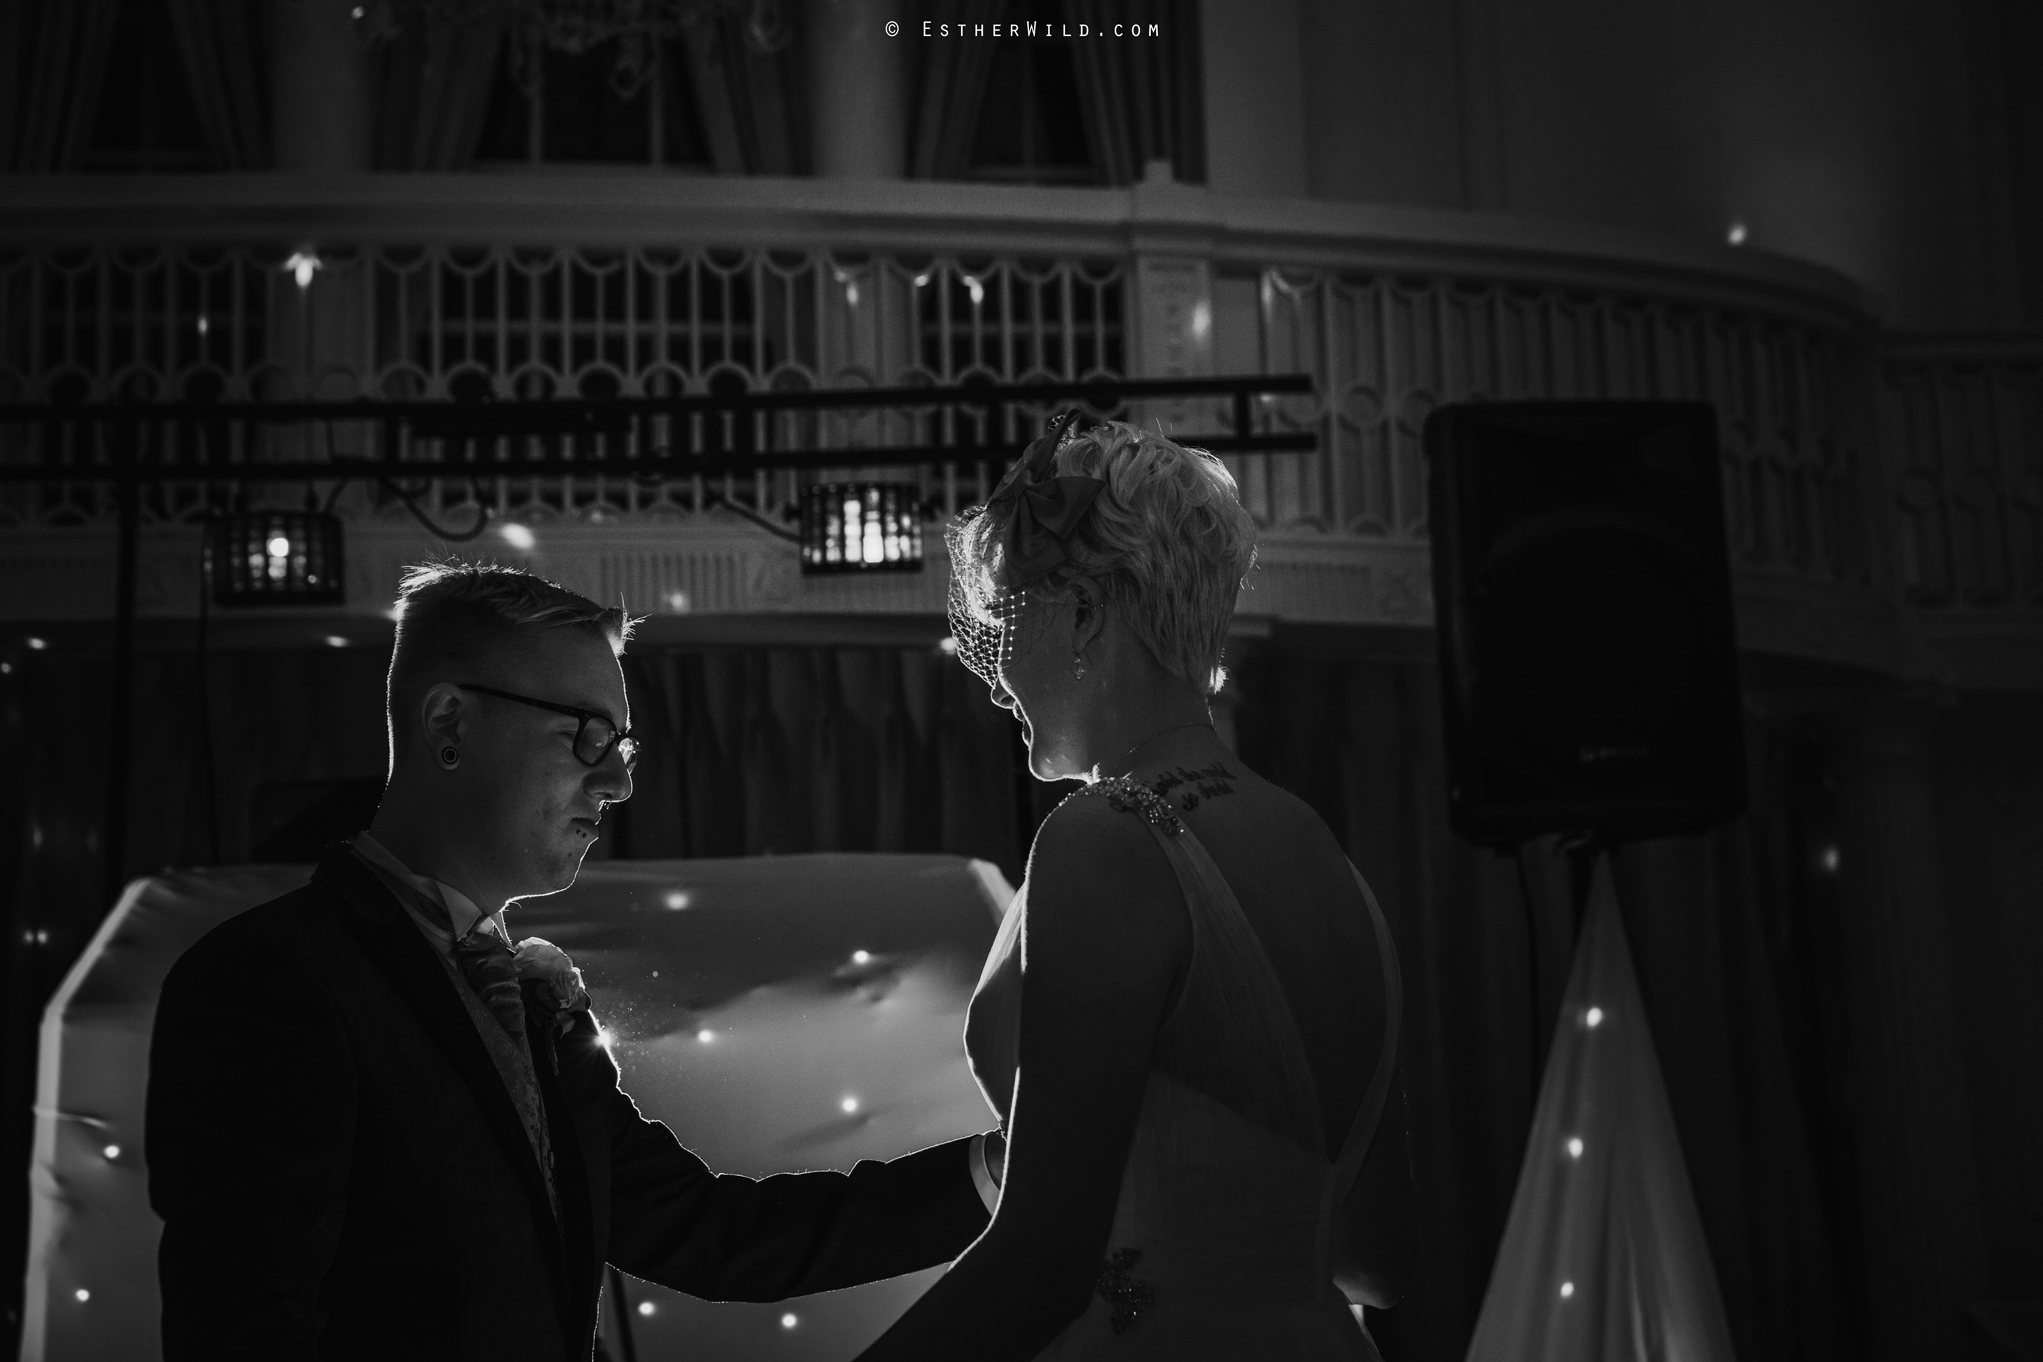 Norwich_Assembly_House_Wedding_Esther_Wild_Photographer_IMG_4935-1.jpg